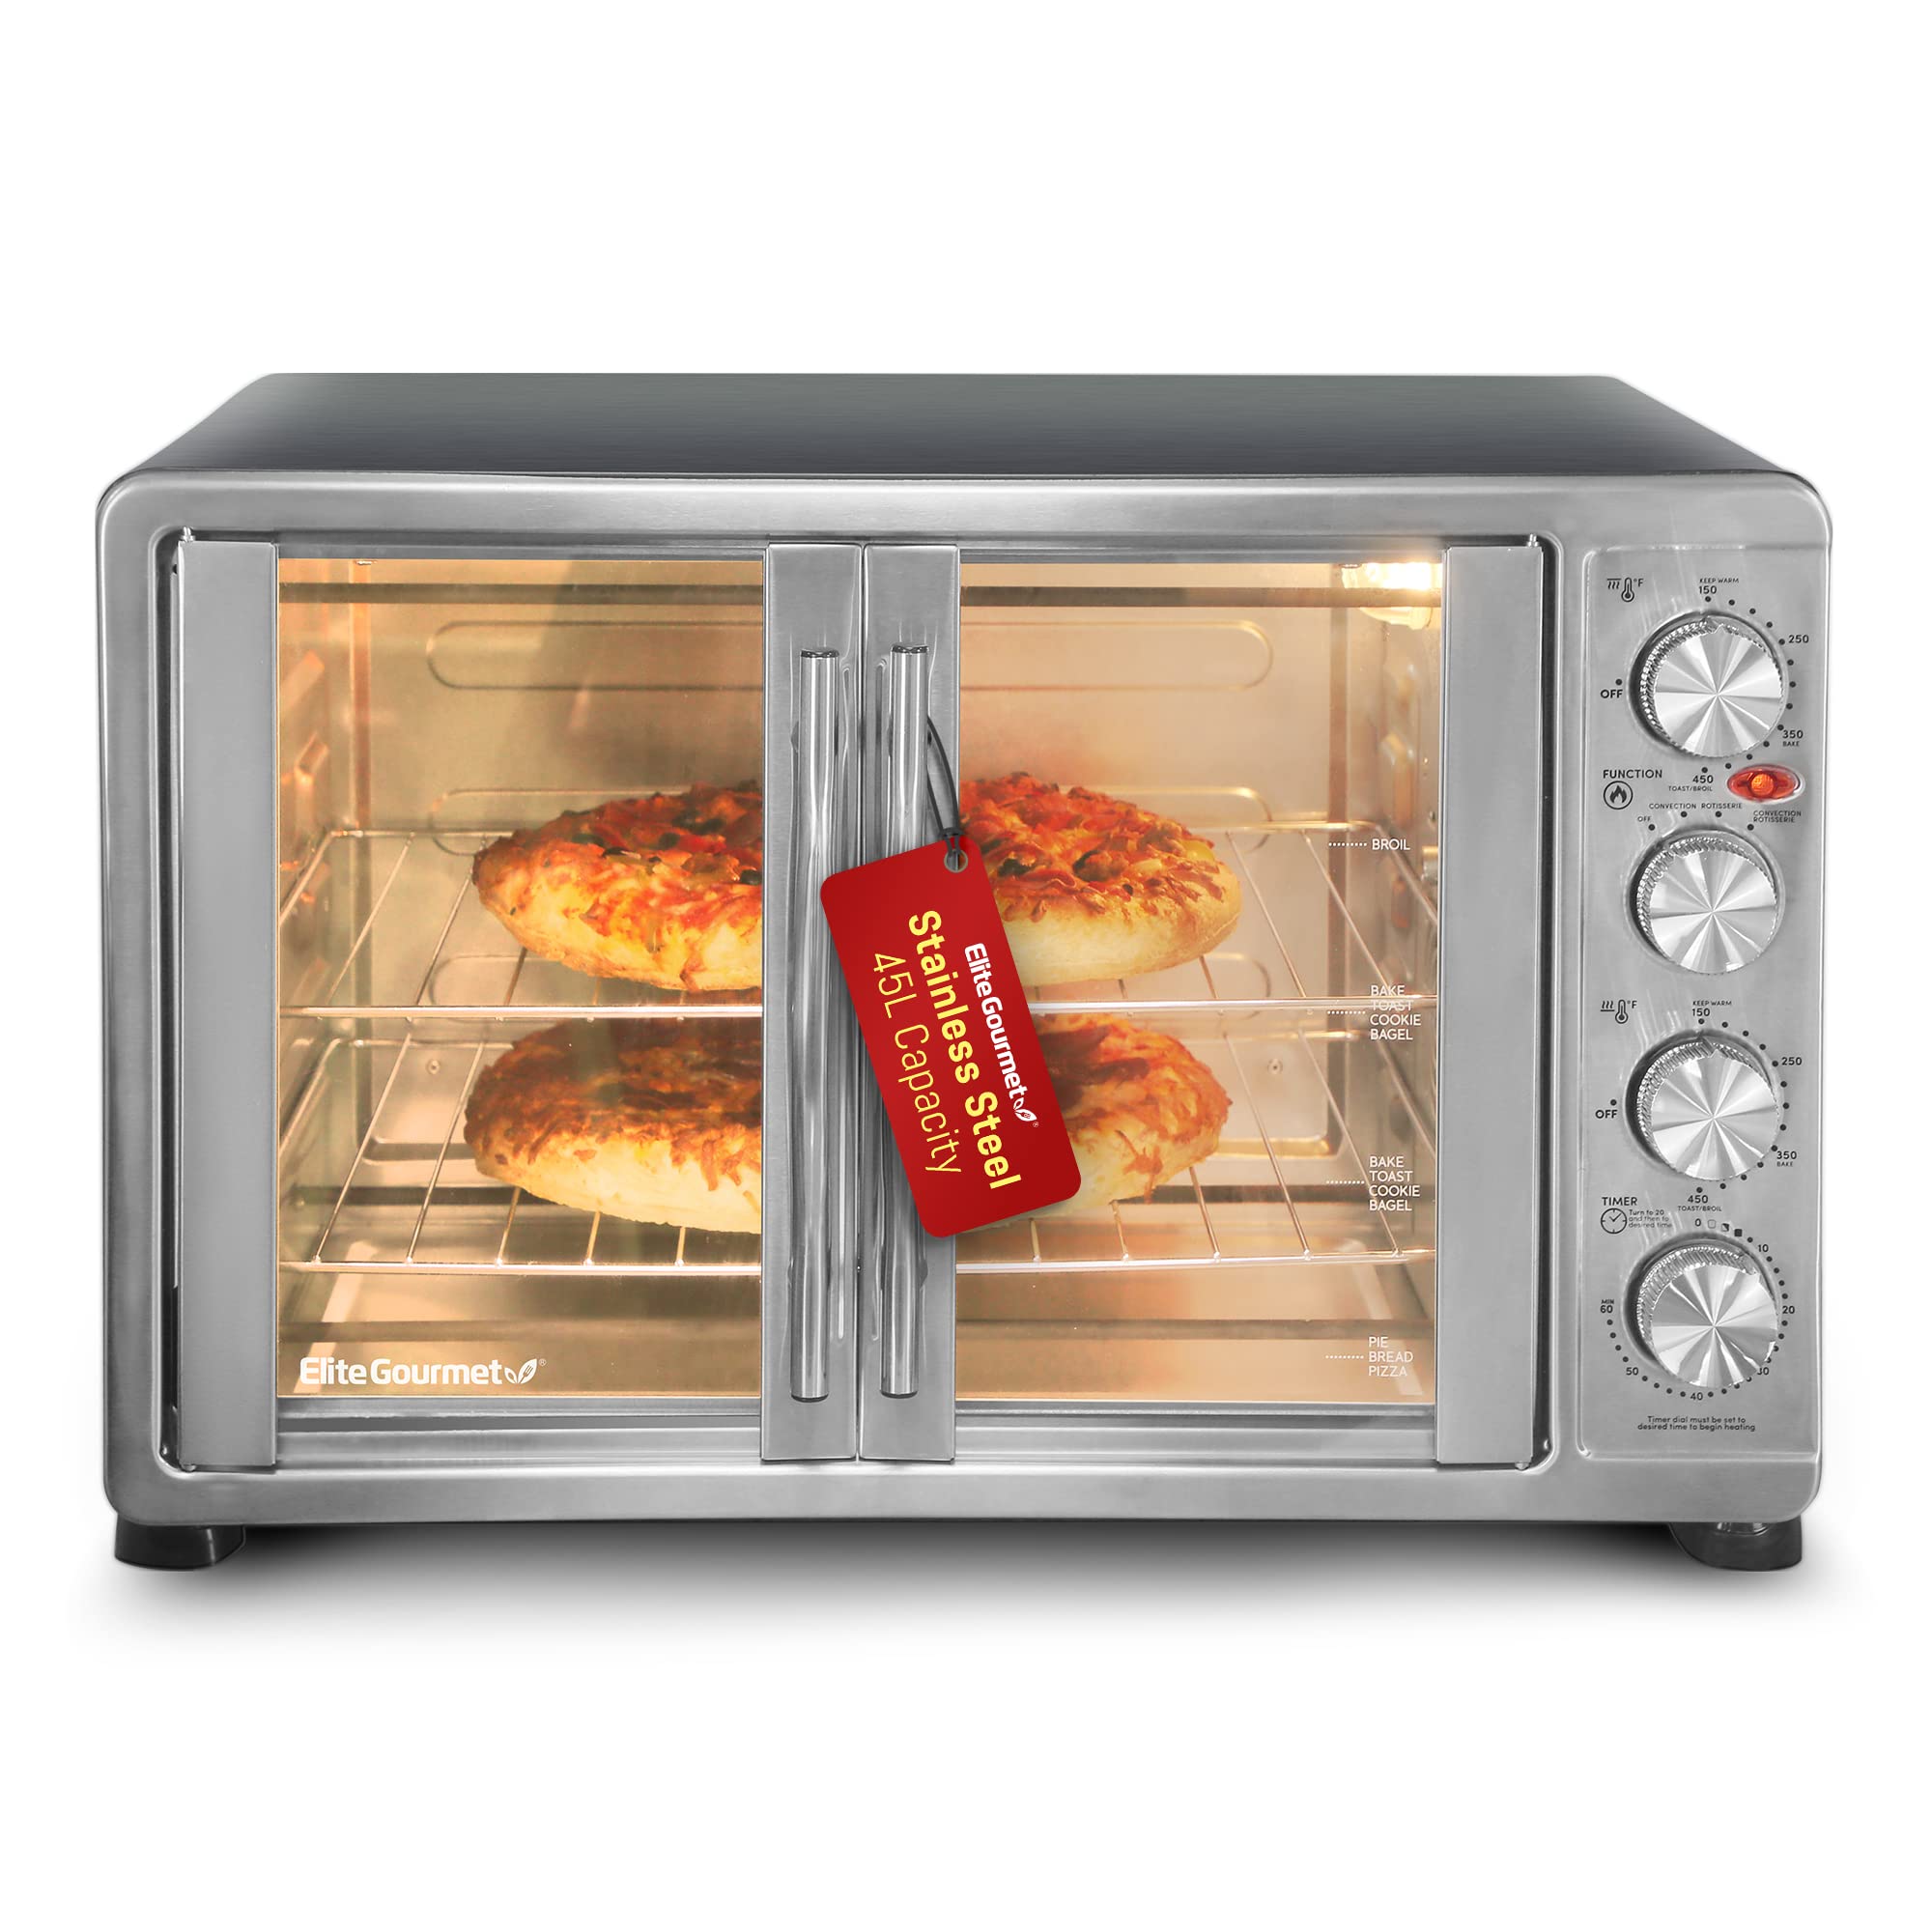 Elite gourmet ETO4510B# French Door 475Qt, 18-Slice convection Oven 4-control Knobs, Bake Broil Toast Rotisserie Keep Warm, Incl